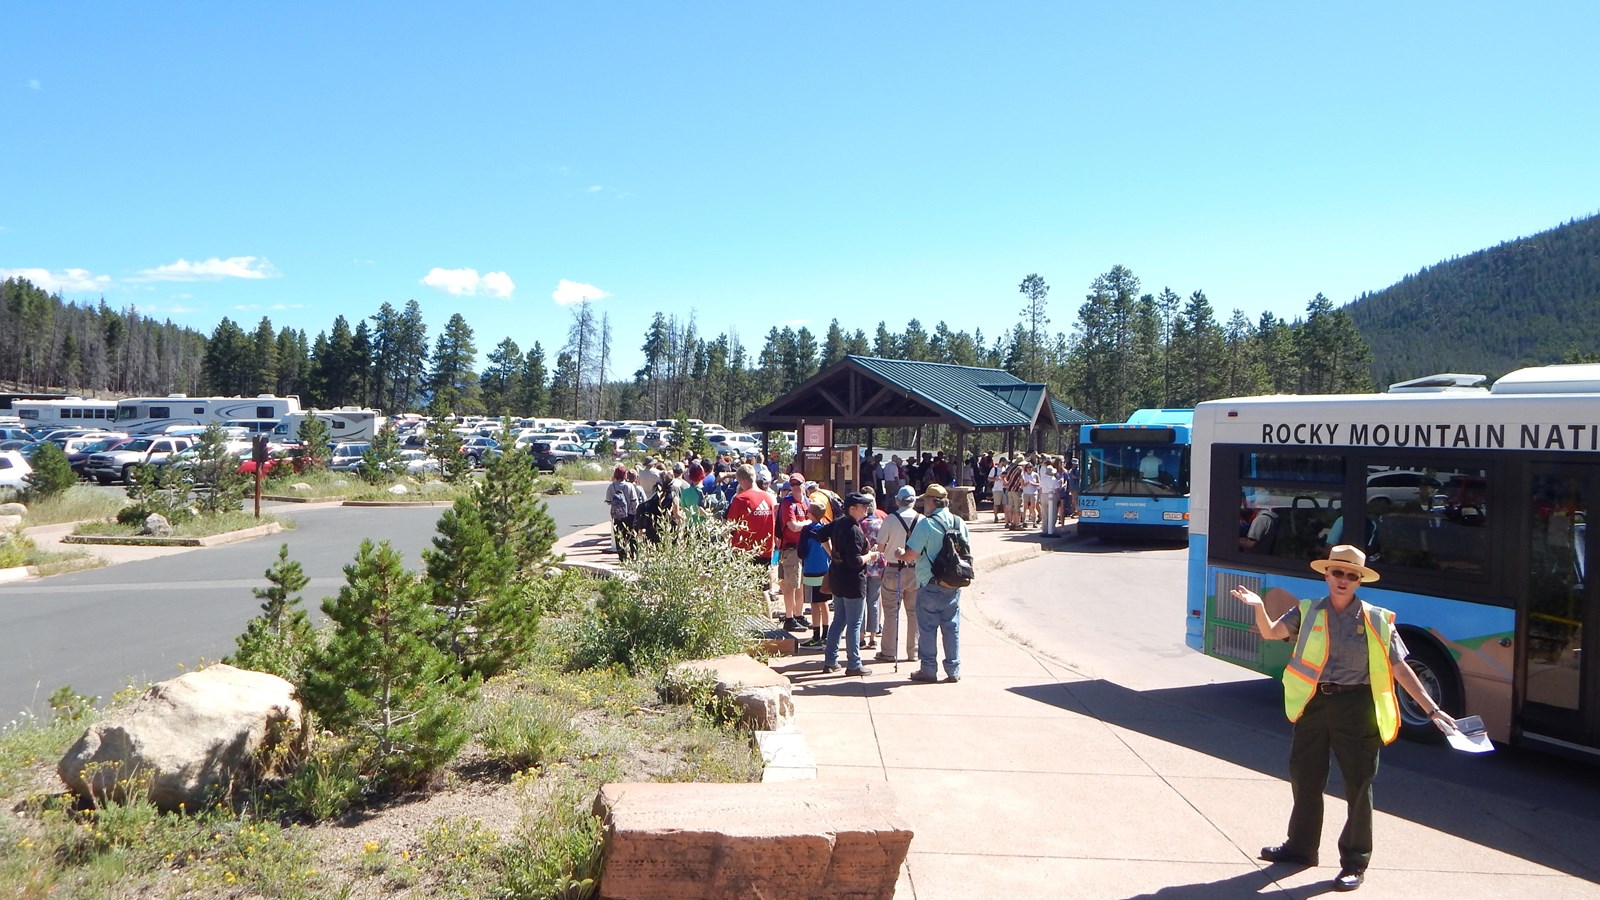 A ranger gestures in front of a long line next to buses